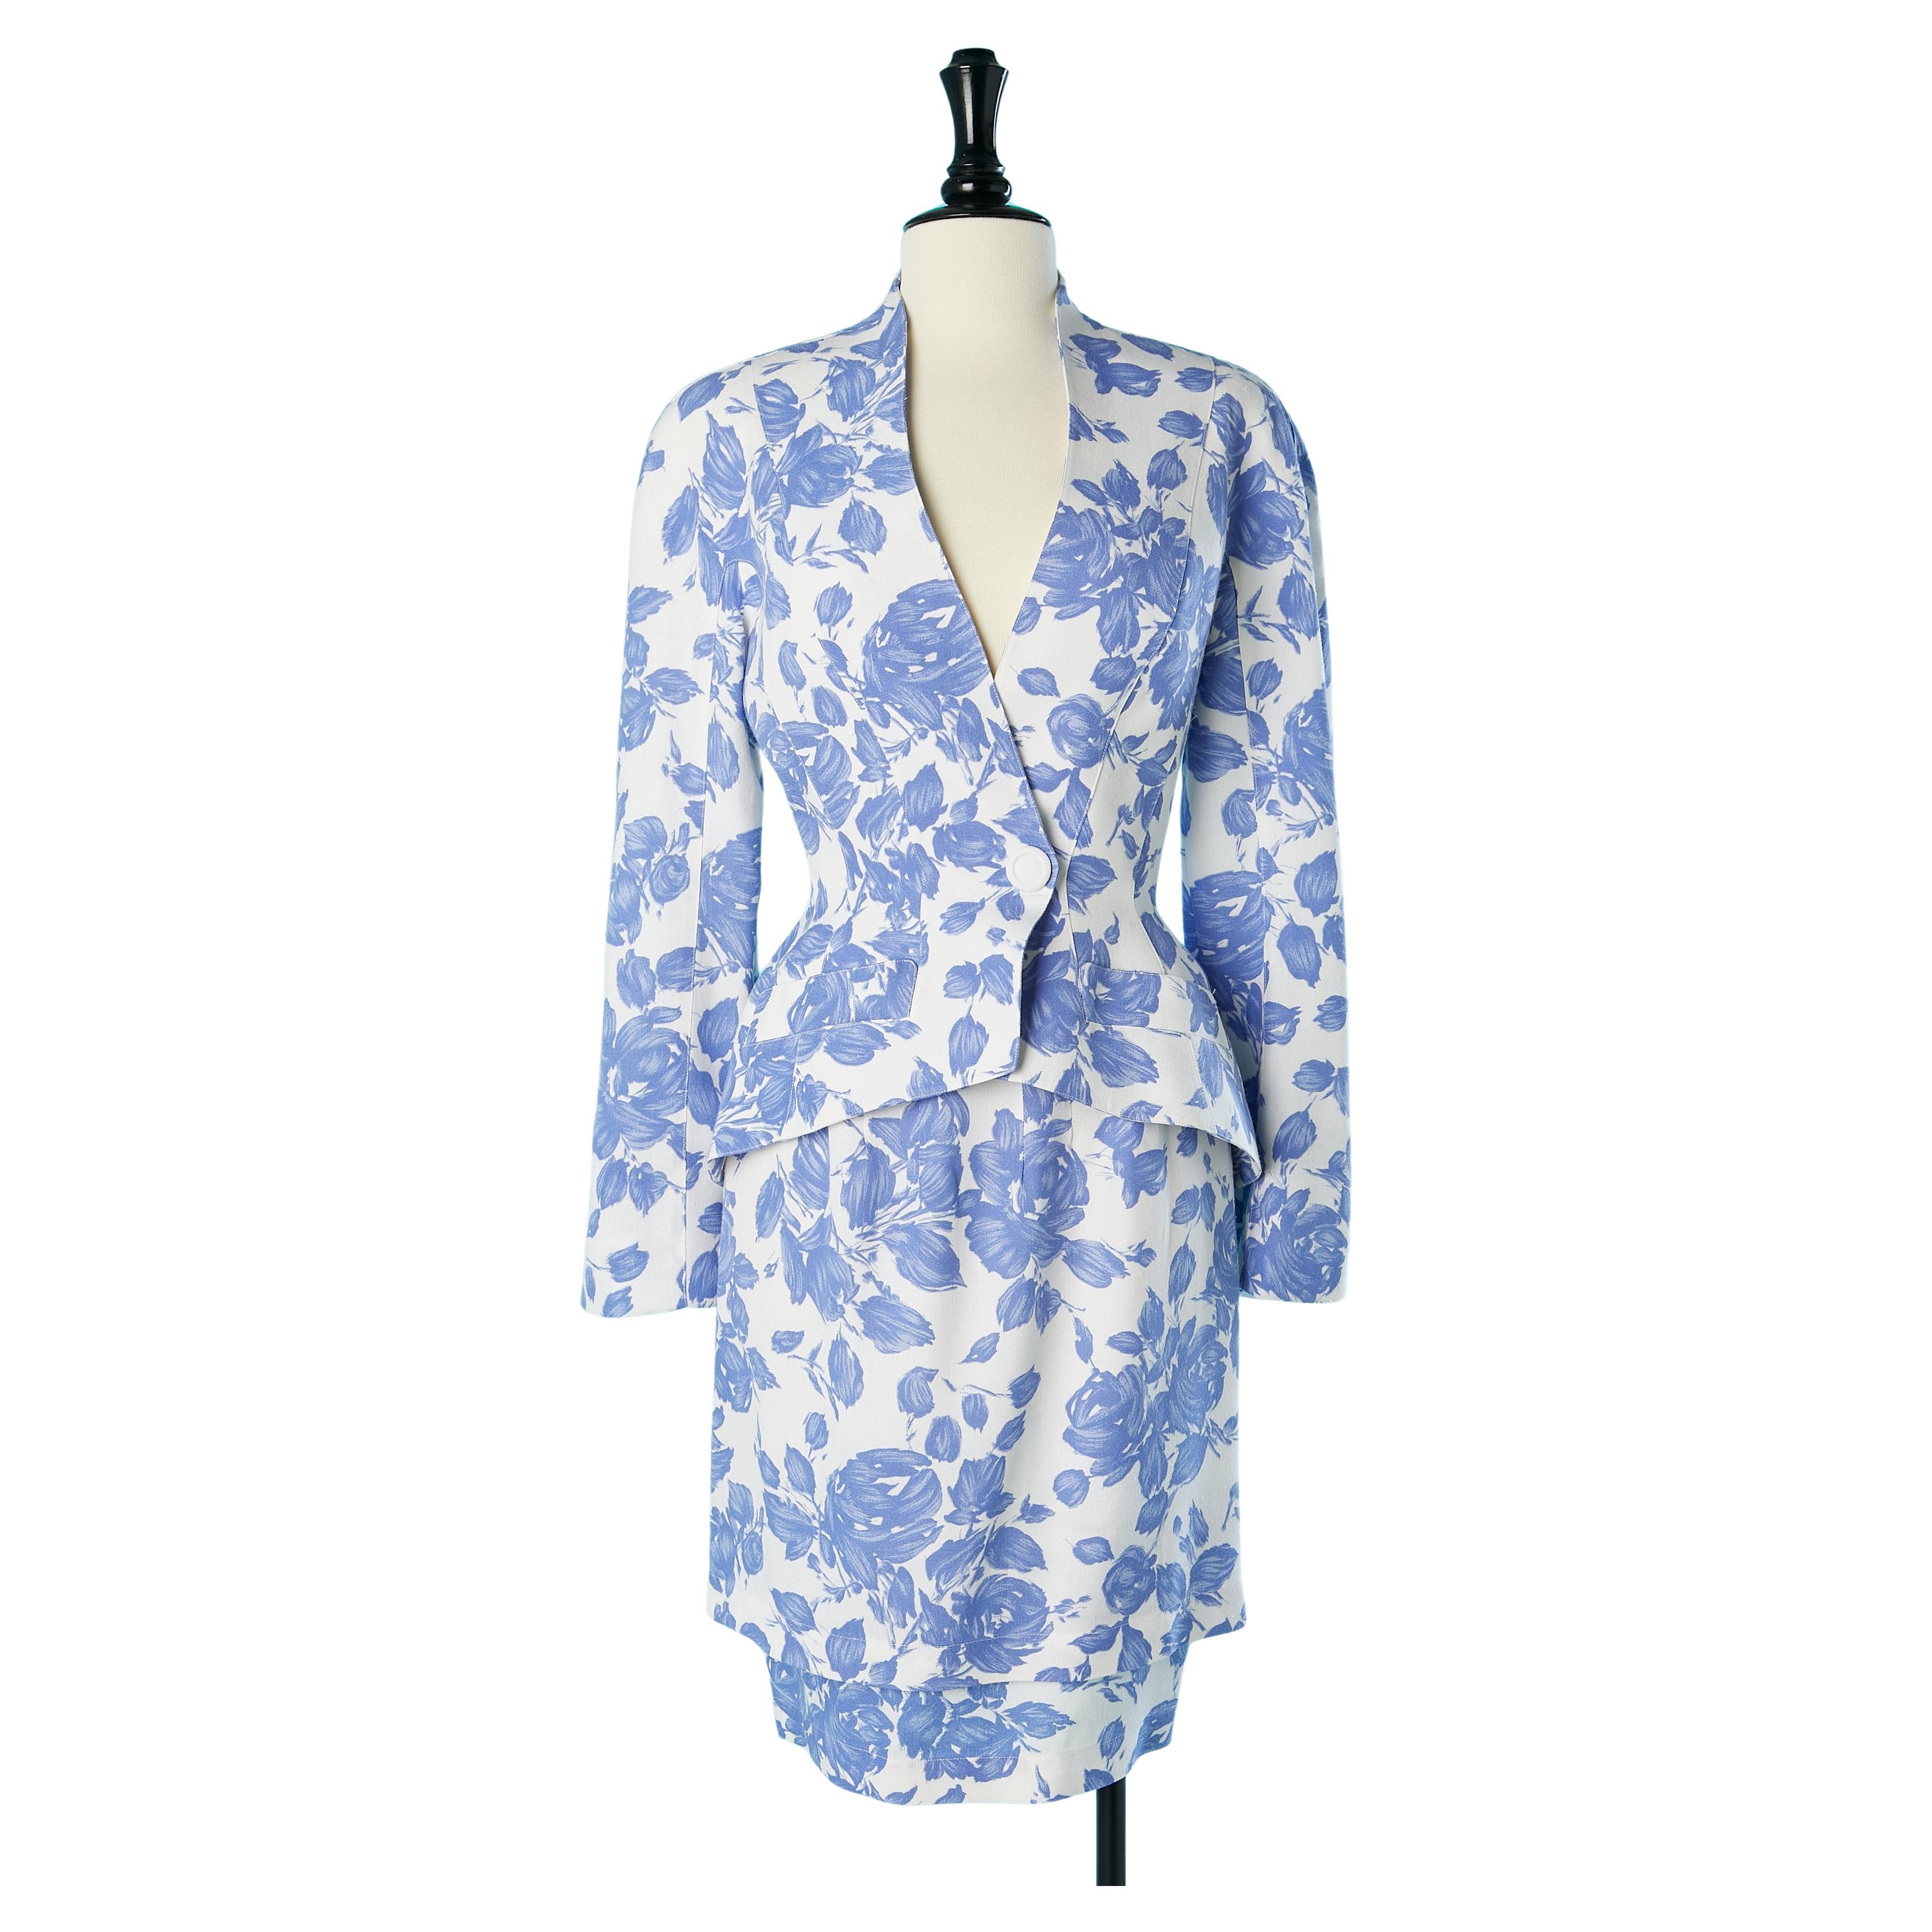 White skirt-suit with blue flower print Thierry Mugler Circa 1980's  For Sale